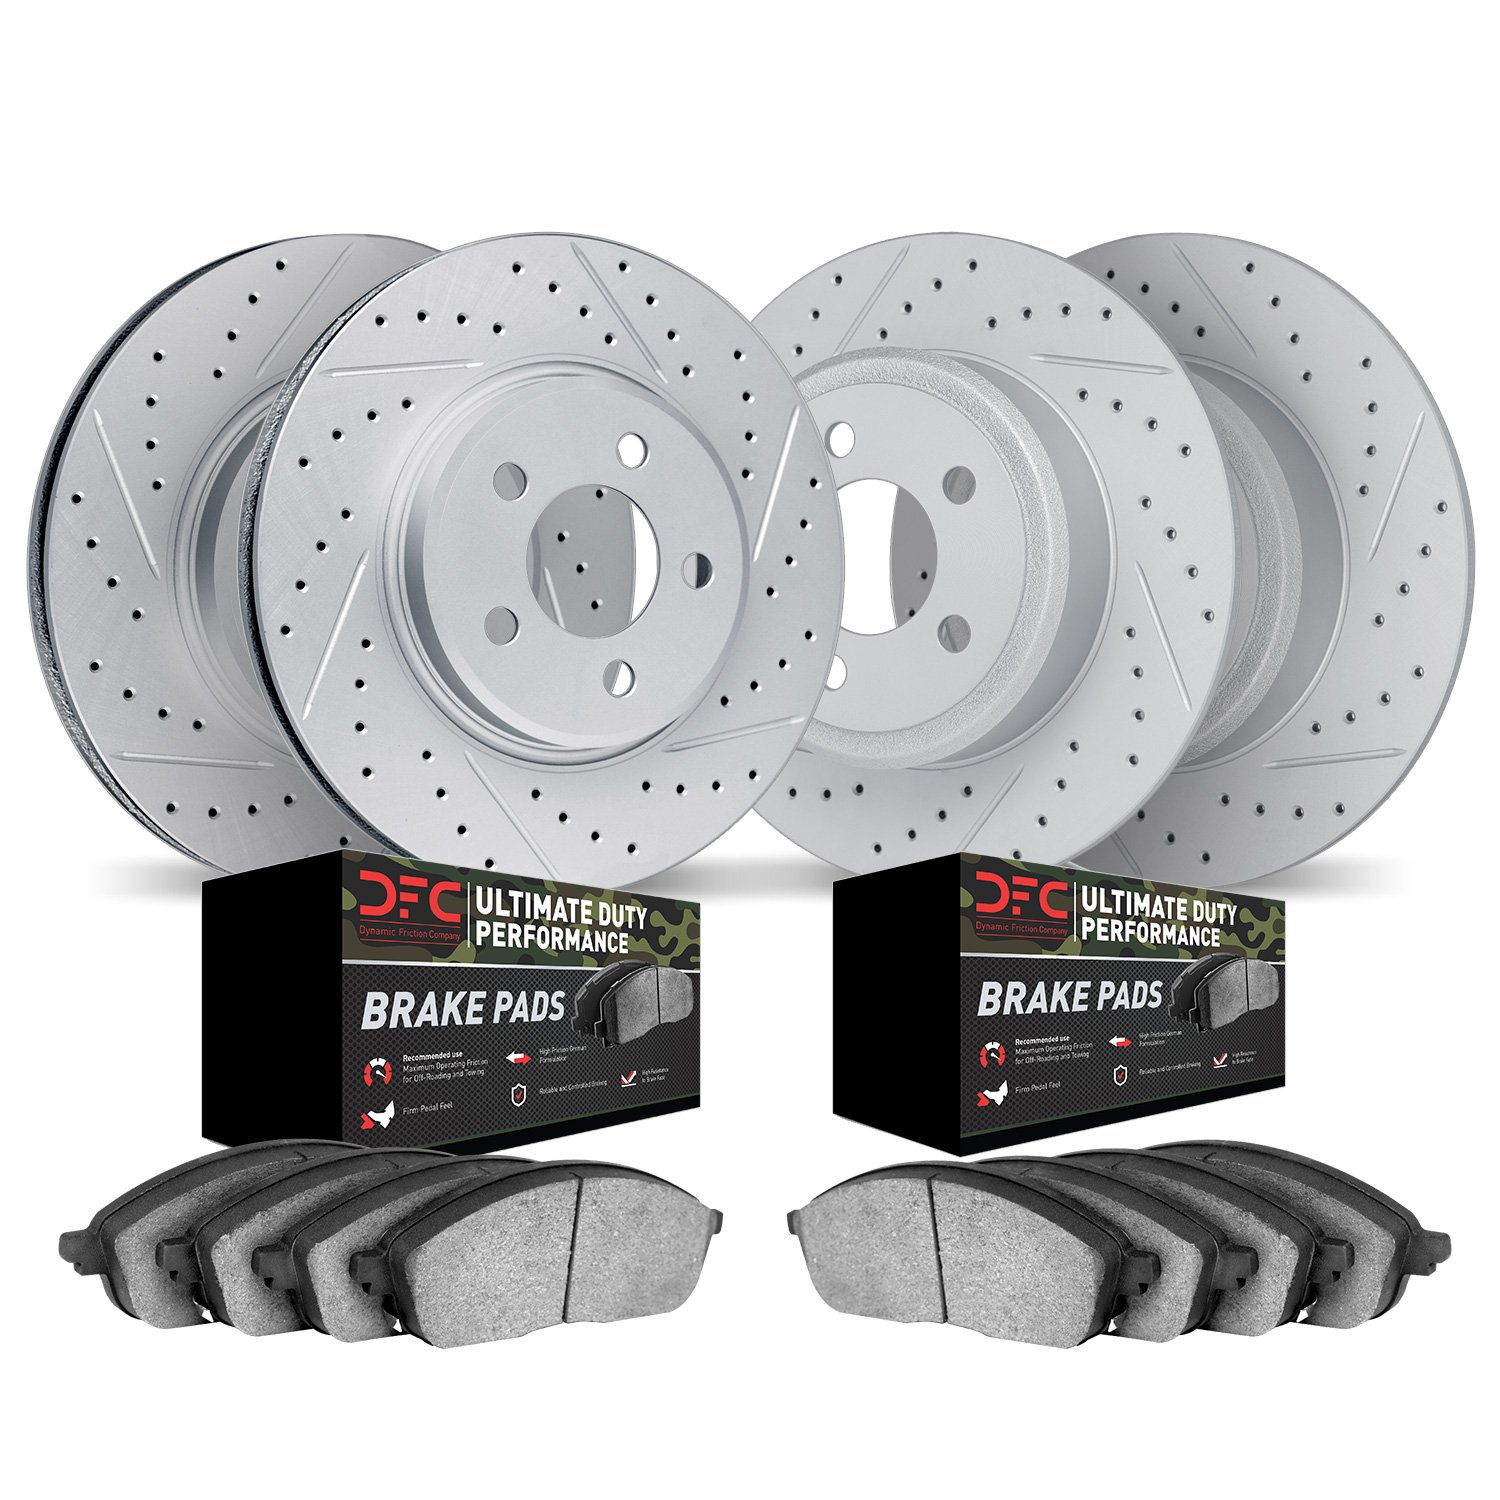 2404-42008 Geoperformance Drilled/Slotted Brake Rotors with Ultimate-Duty Brake Pads Kit, Fits Select Mopar, Position: Front and